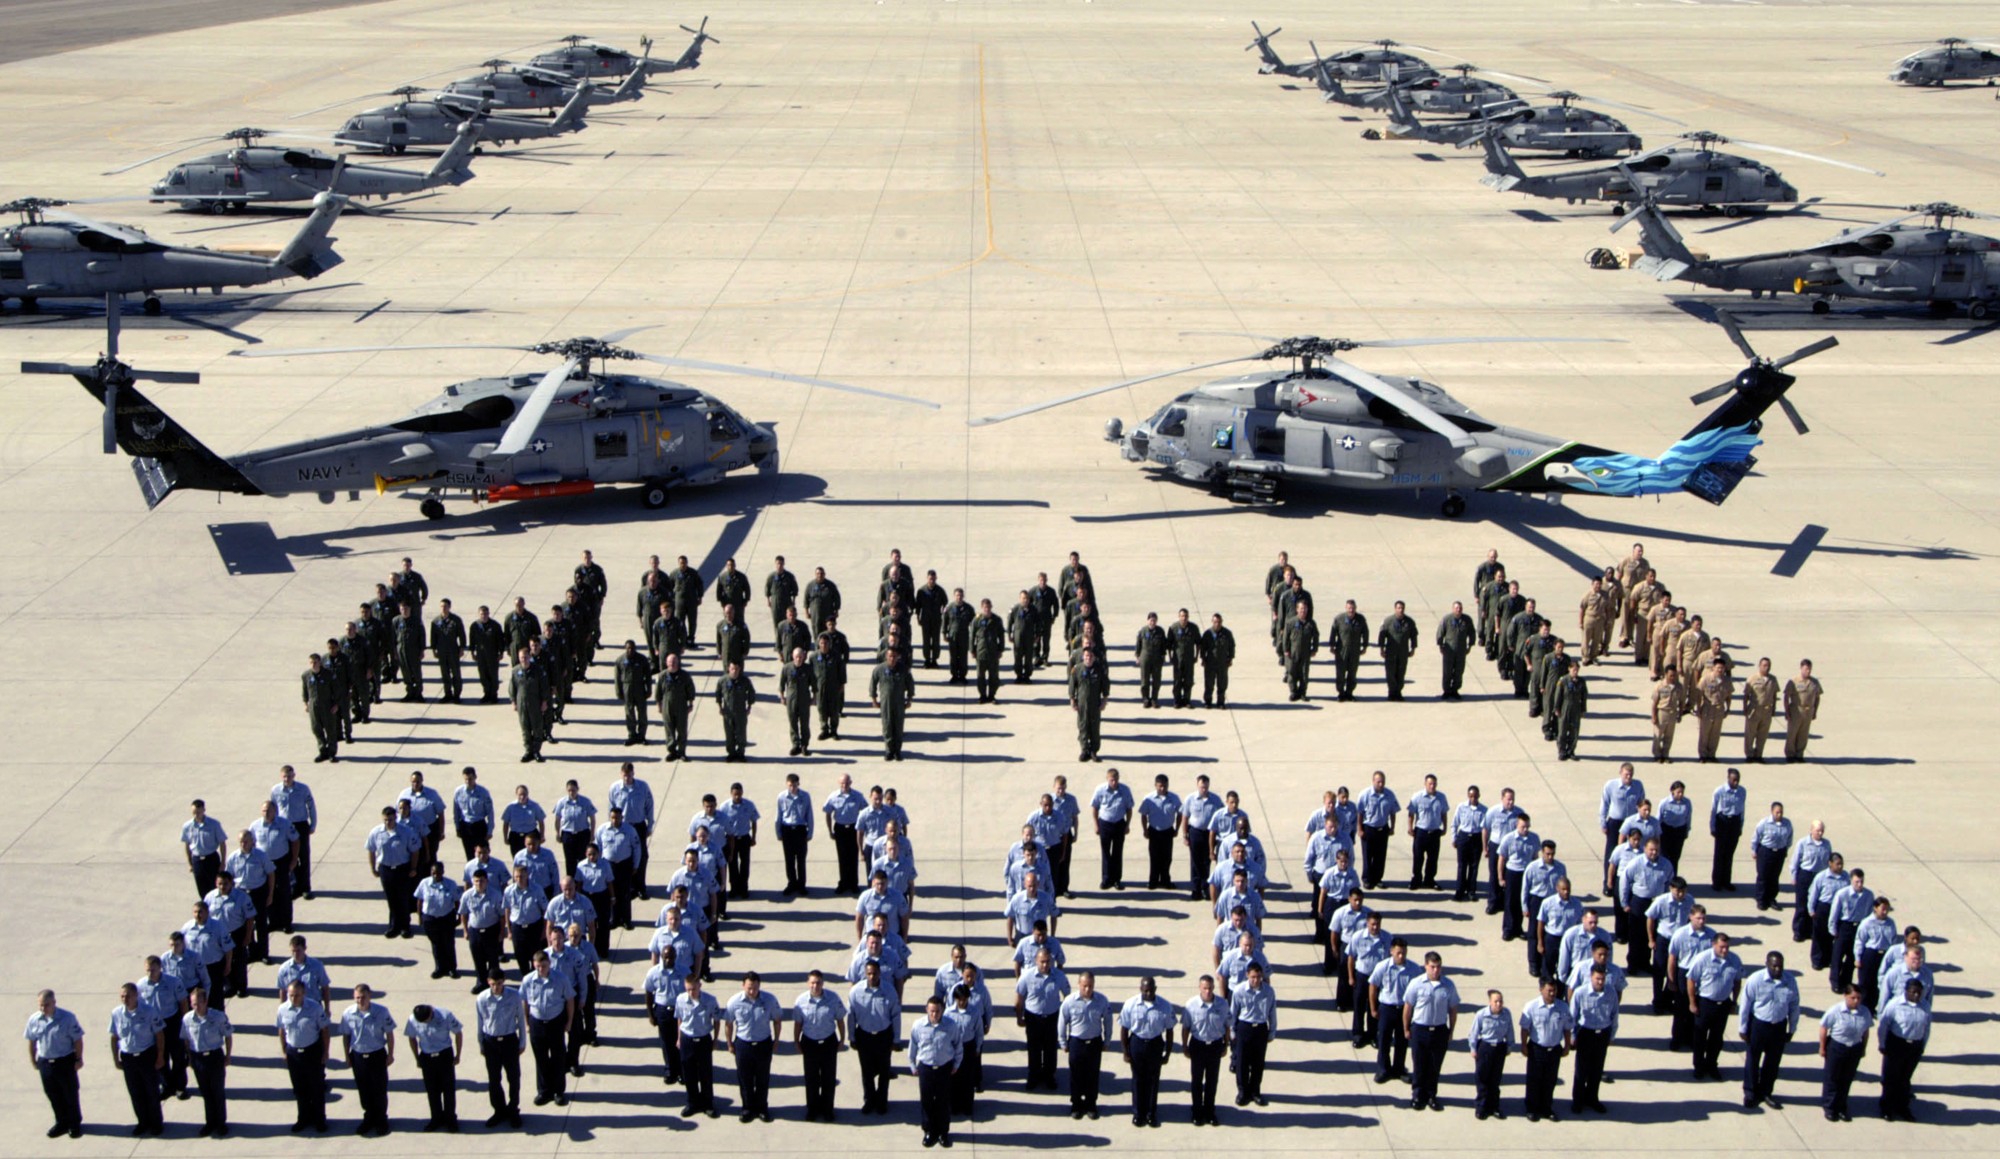 hsm-41 seahawks helicopter maritime strike squadron mh-60r fleet replacement navy 2006 13